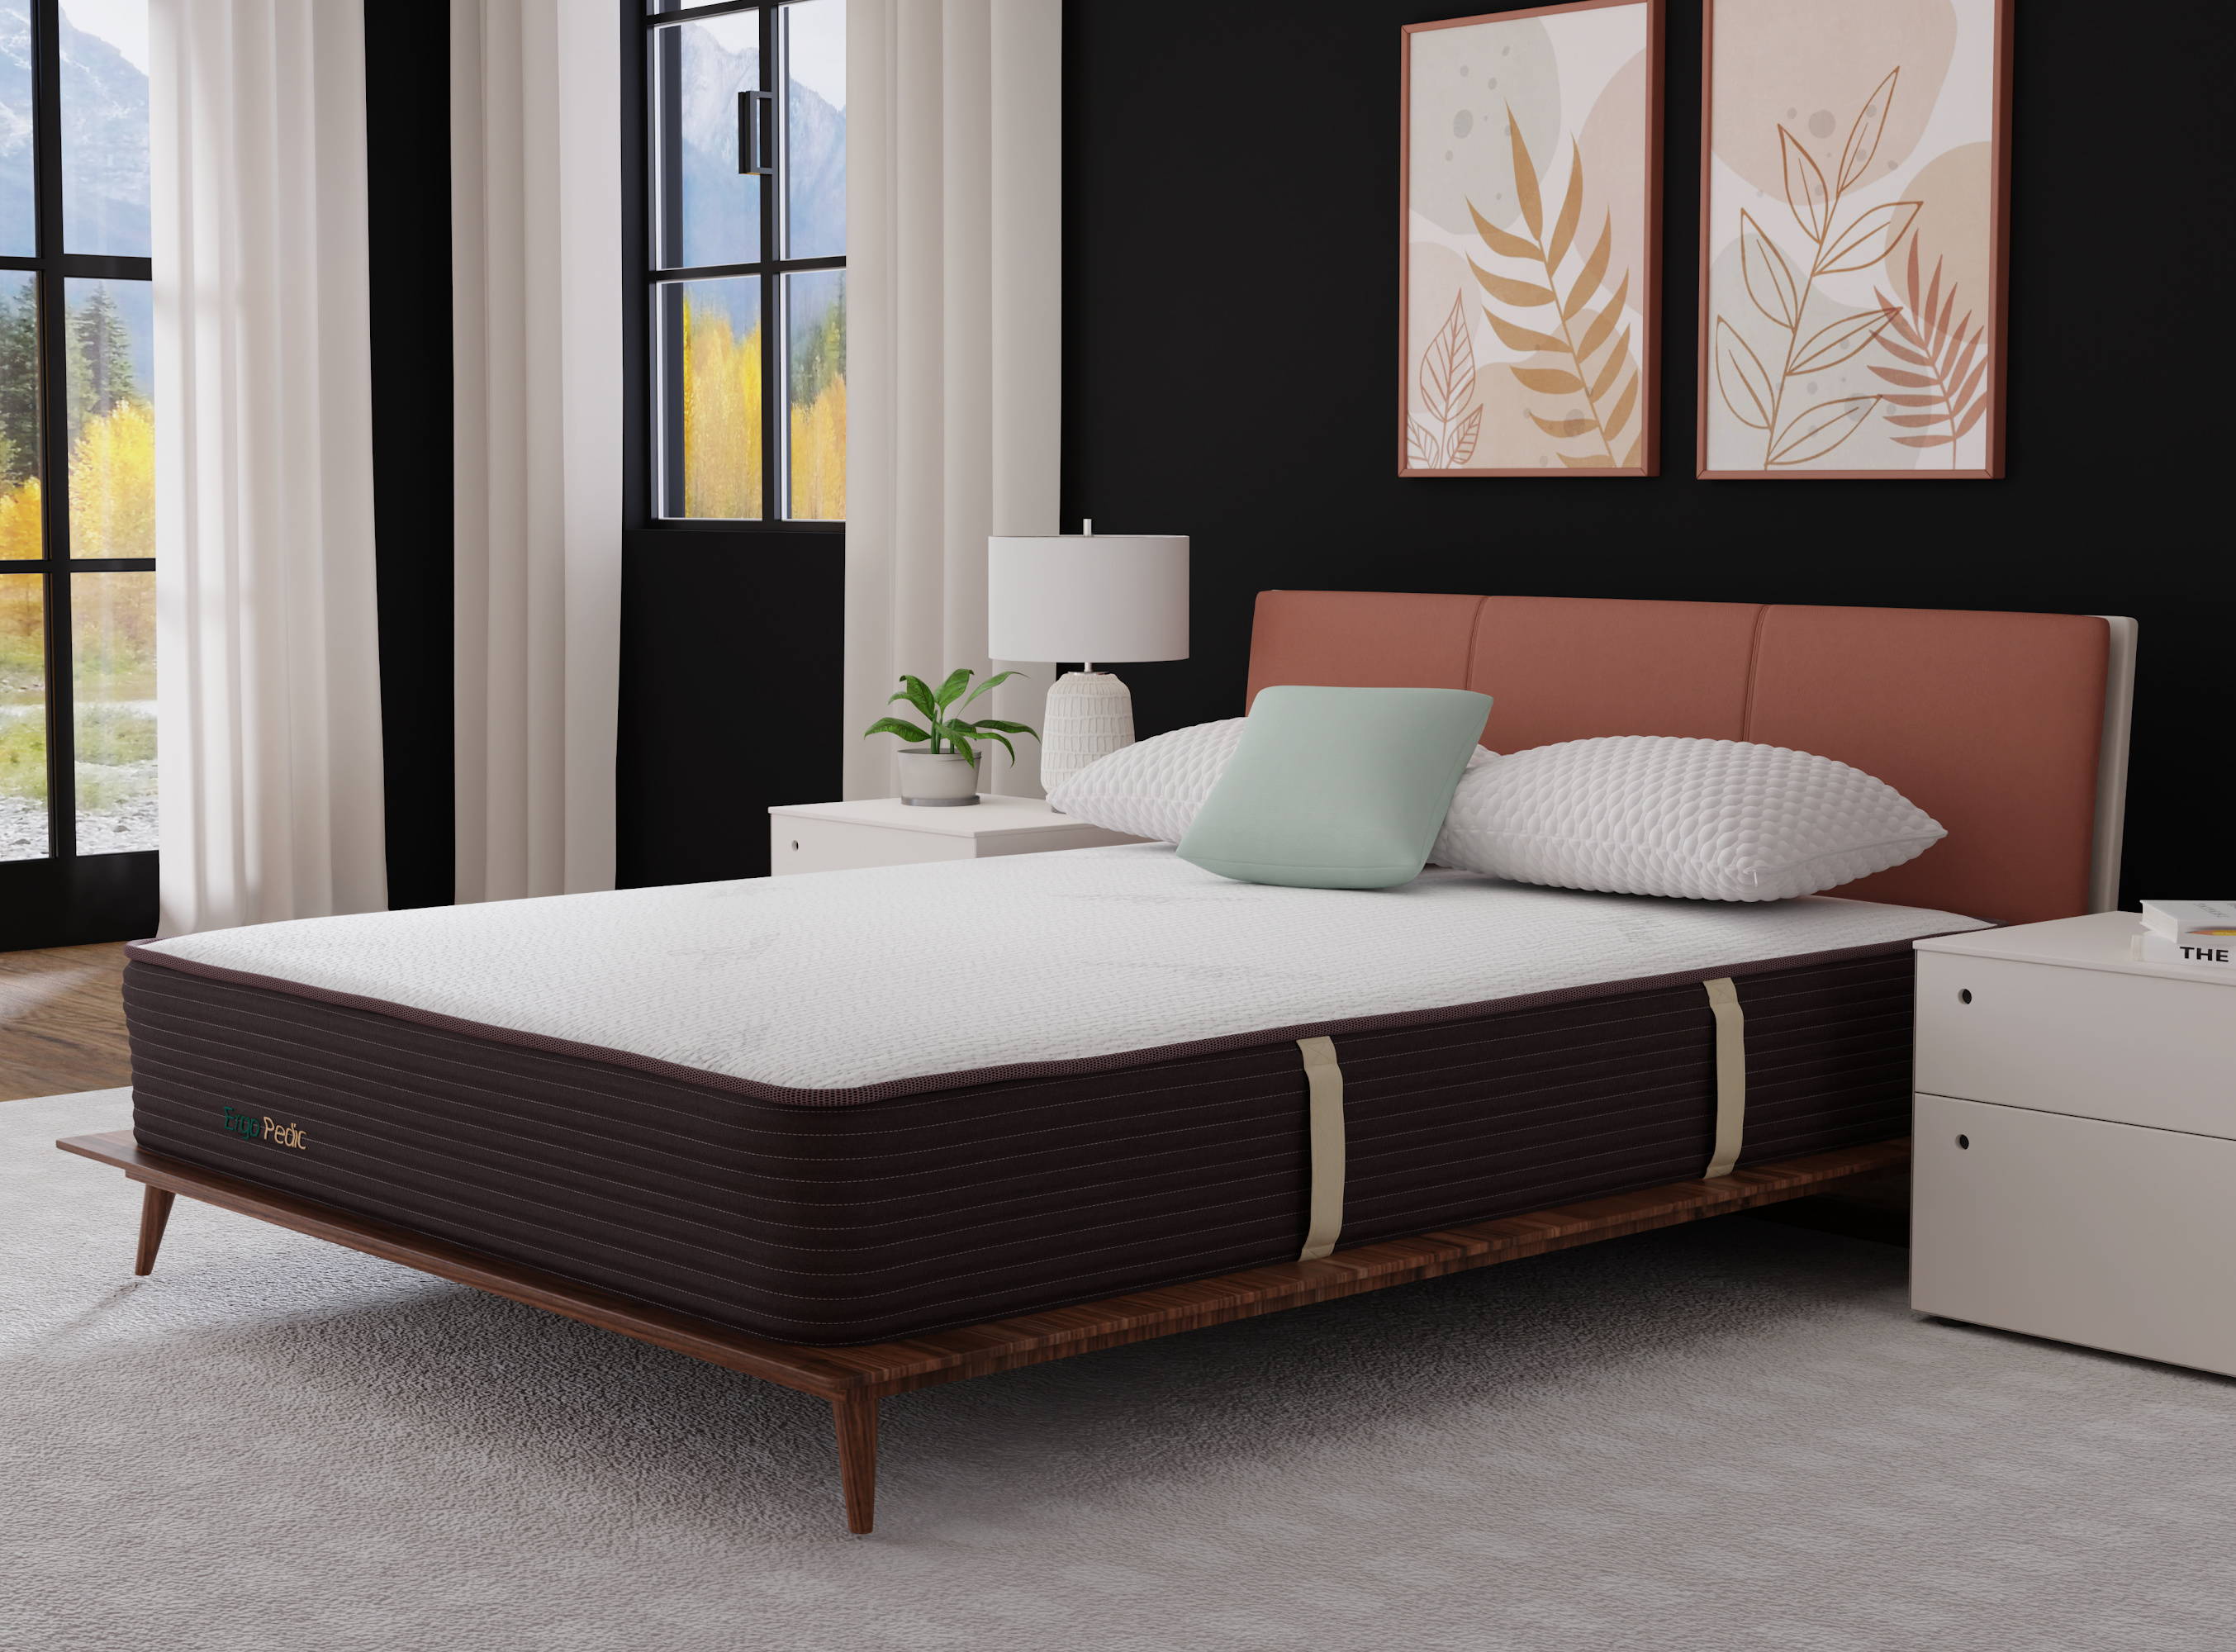 Cooling CopperCloud Hybrid in a bedroom on a platform bed with charcoal walls.